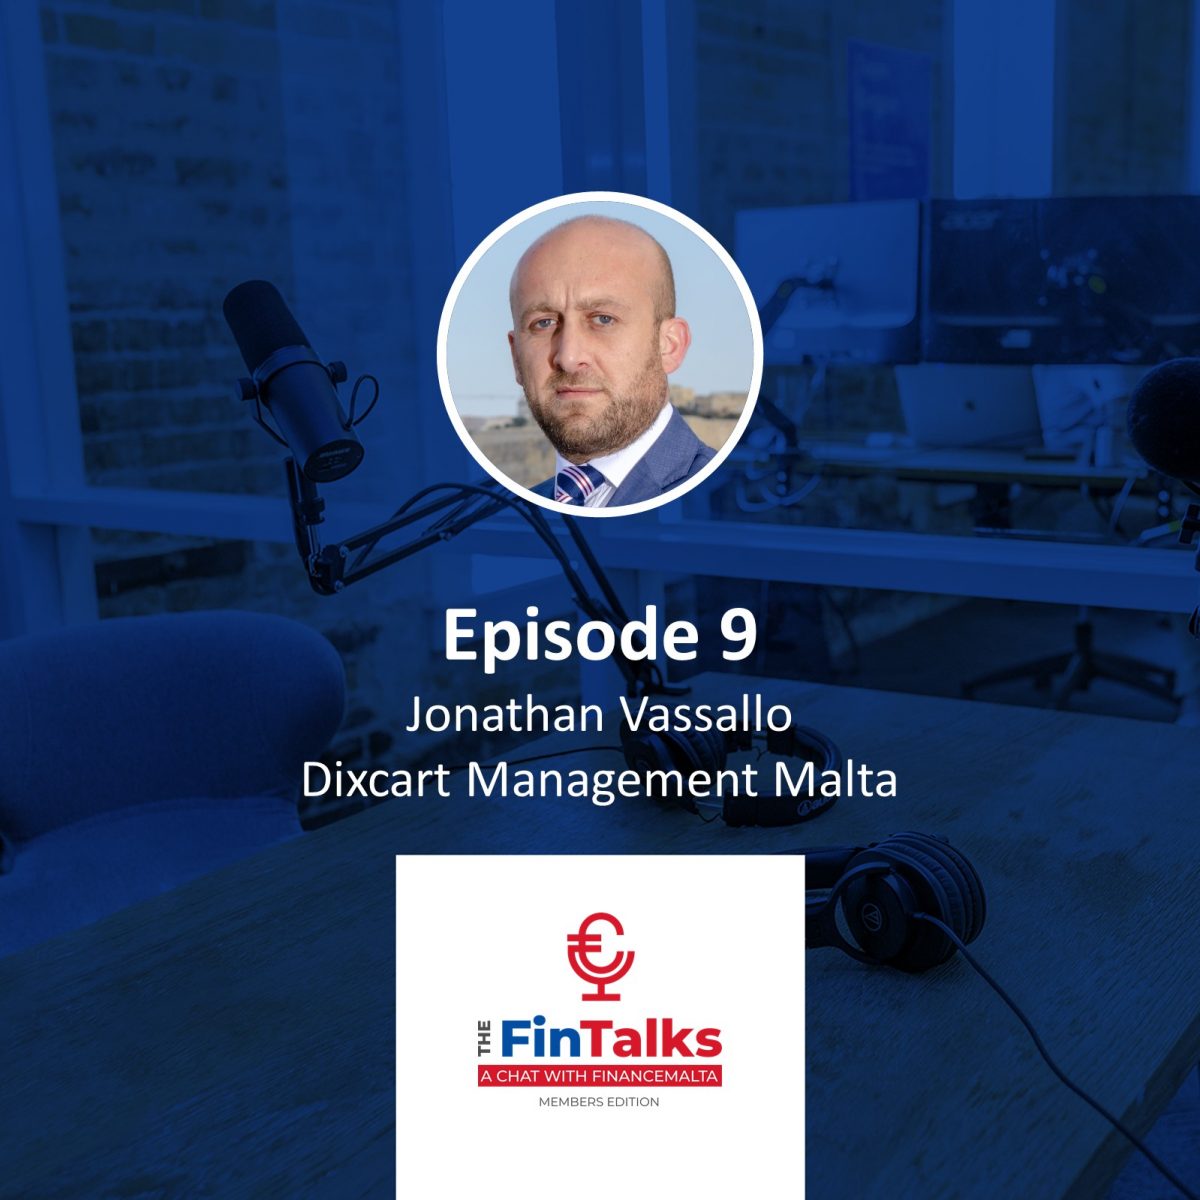 Episode 9 [Members Edition]: A focus on Private Wealth in Malta